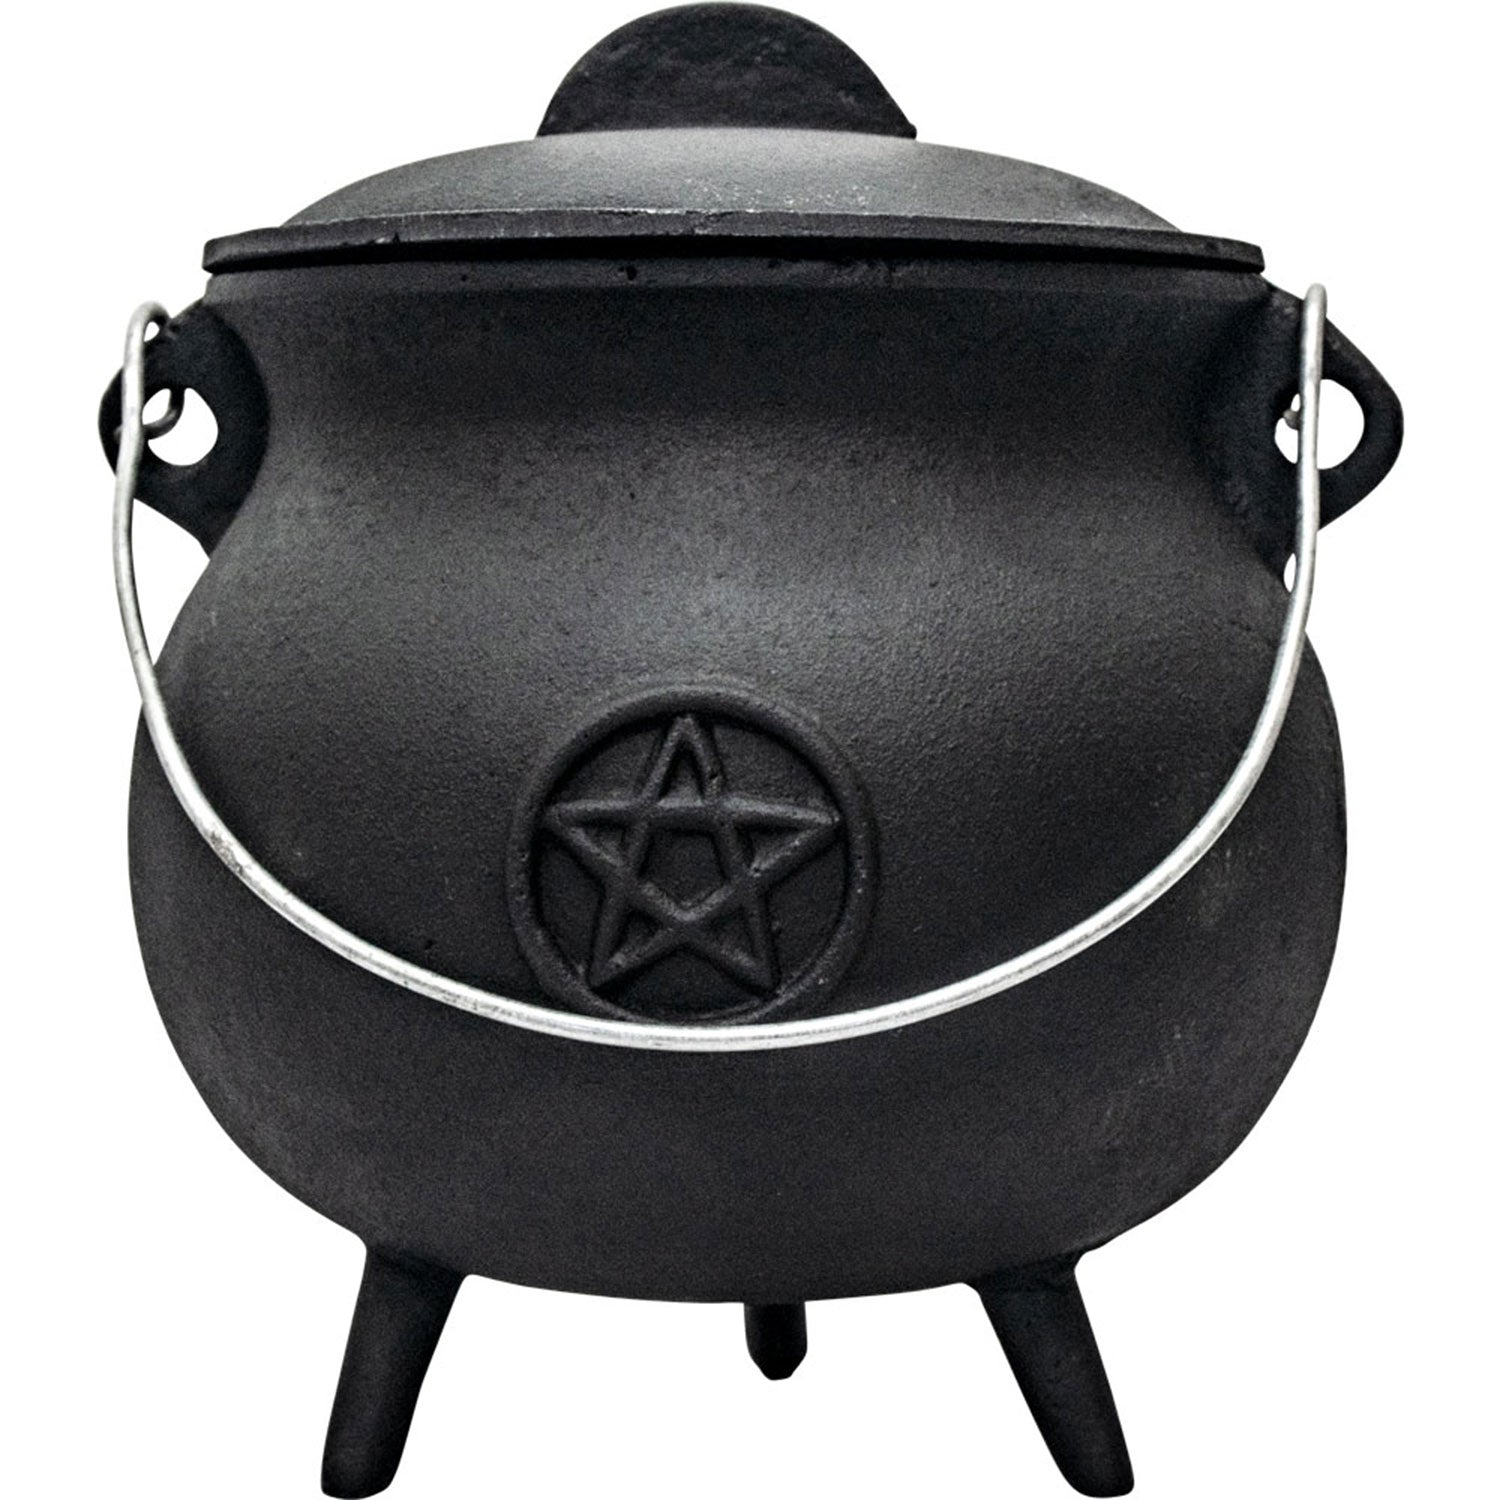 https://cdn.shopify.com/s/files/1/0589/9439/3227/products/potbelly-pentacle-cauldron-85-inch-124384.jpg?v=1663863689&width=1500